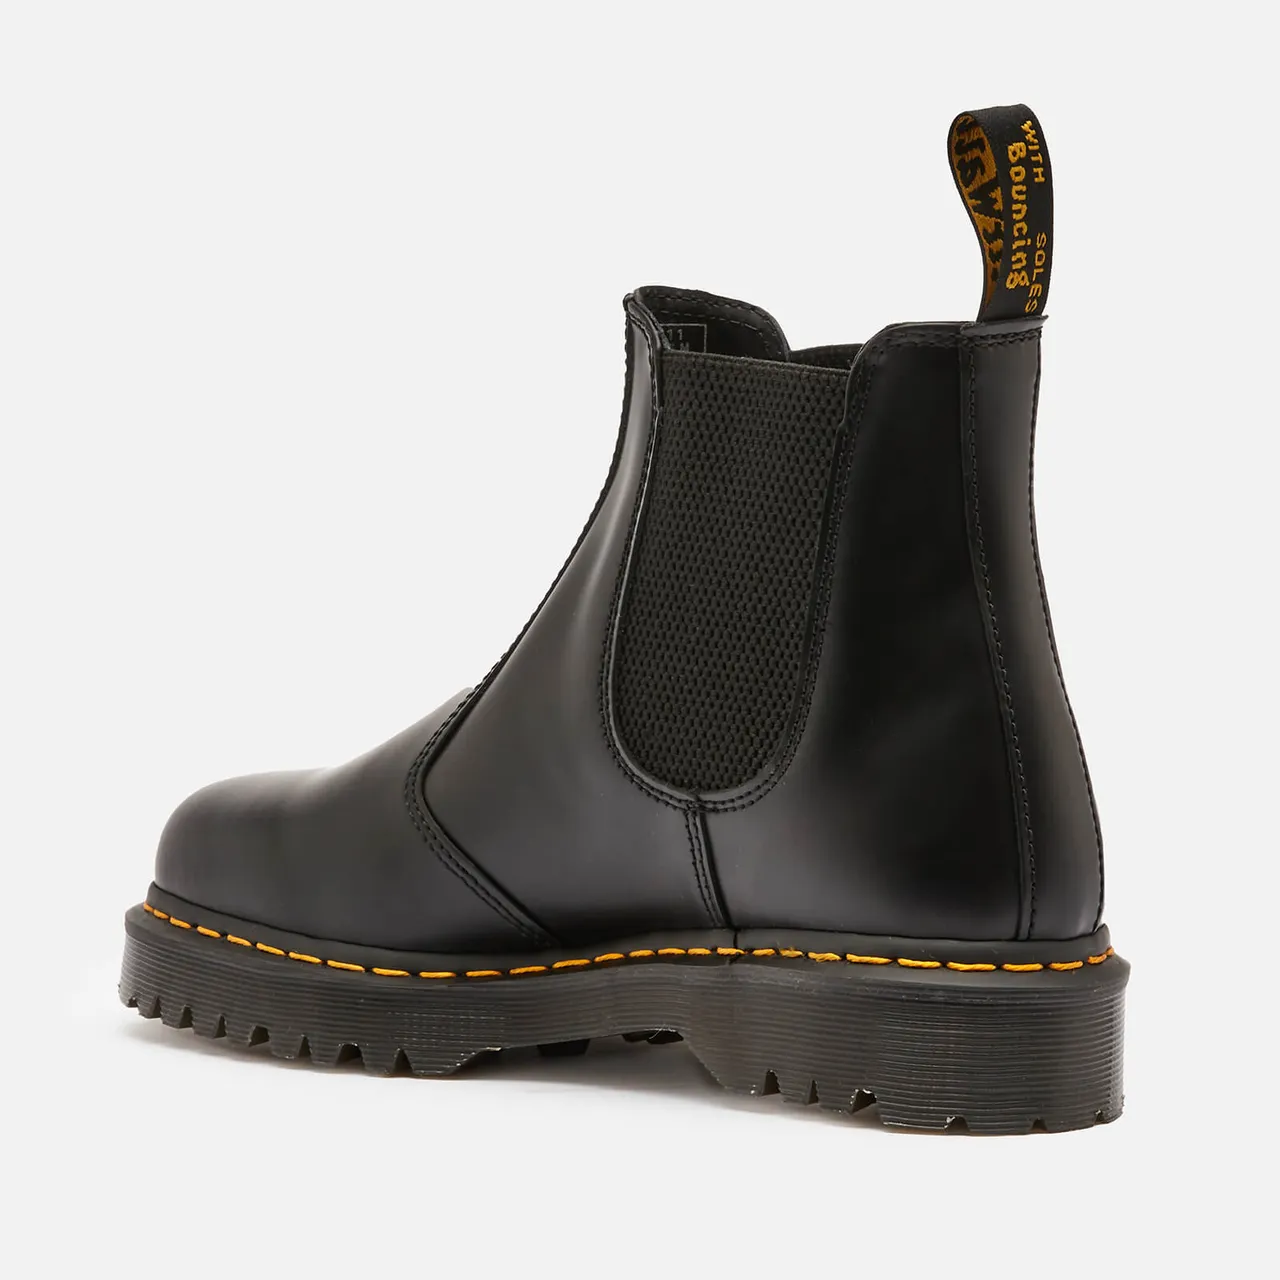 Dr. Martens 2976 Bex Smooth Leather Chelsea Boots - Black - UK